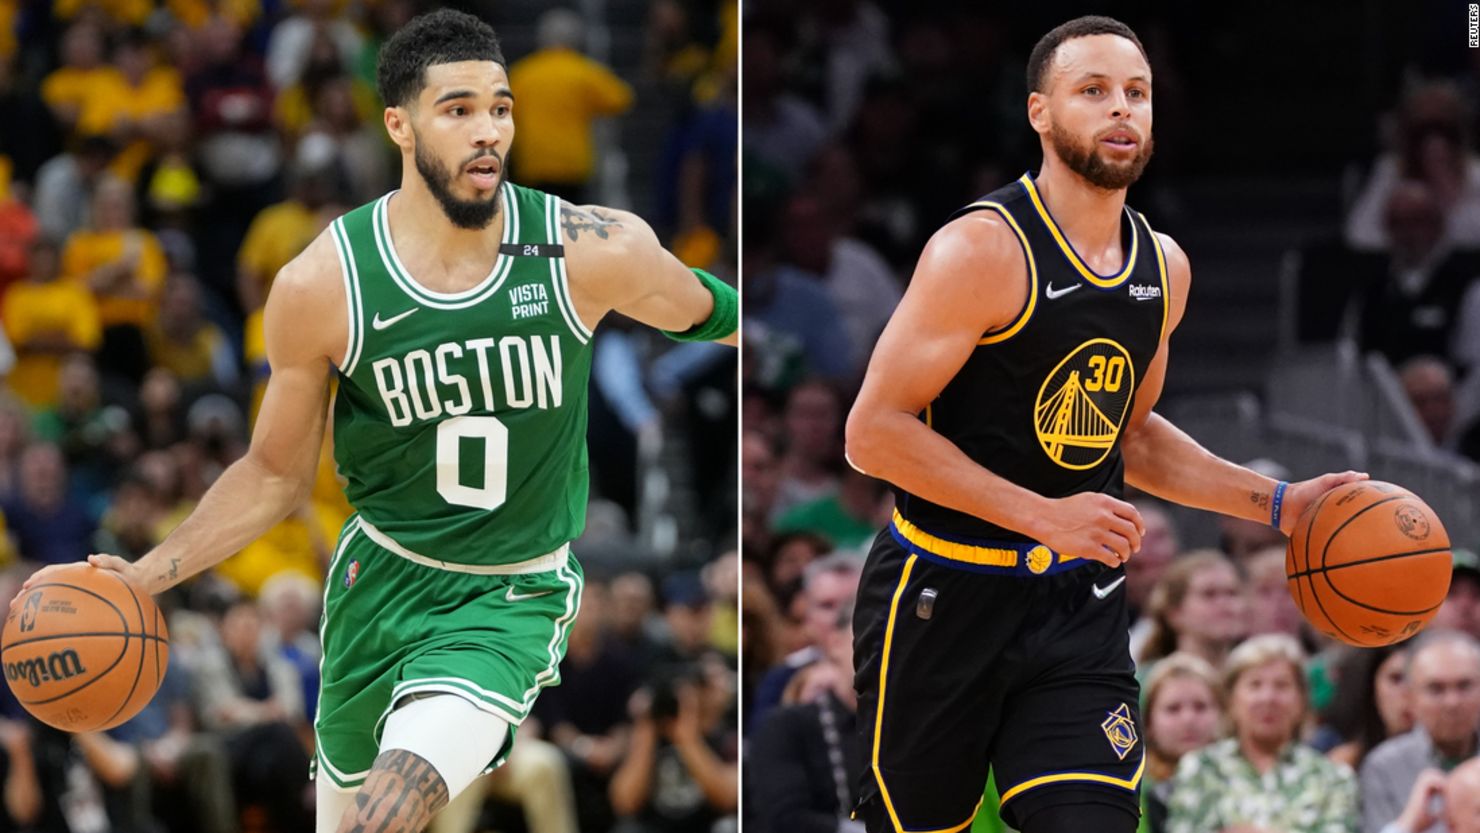 Jayson Tatum and Steph Curry are hoping to lead their teams in Thursday's Game 6.